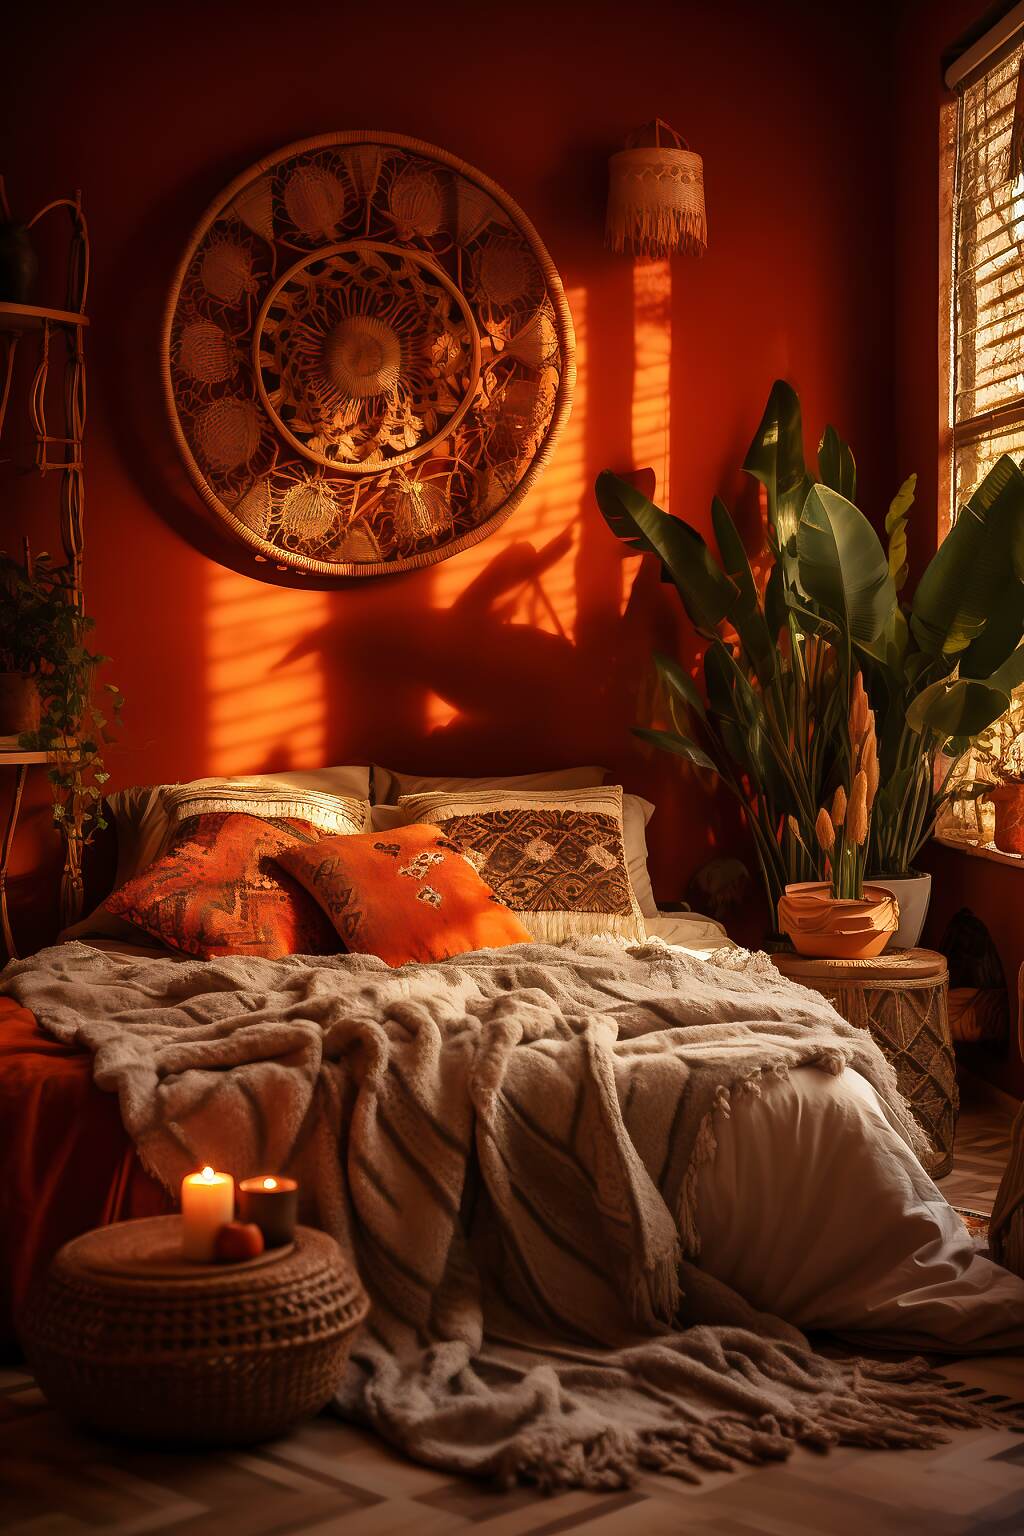 Large Dark Boho Bedroom With An Orange &Amp; Beige Color Scheme, Featuring Cactus Decor, Woven Baskets, And Desert Artwork, Creating A Relaxing And Warm Atmosphere.